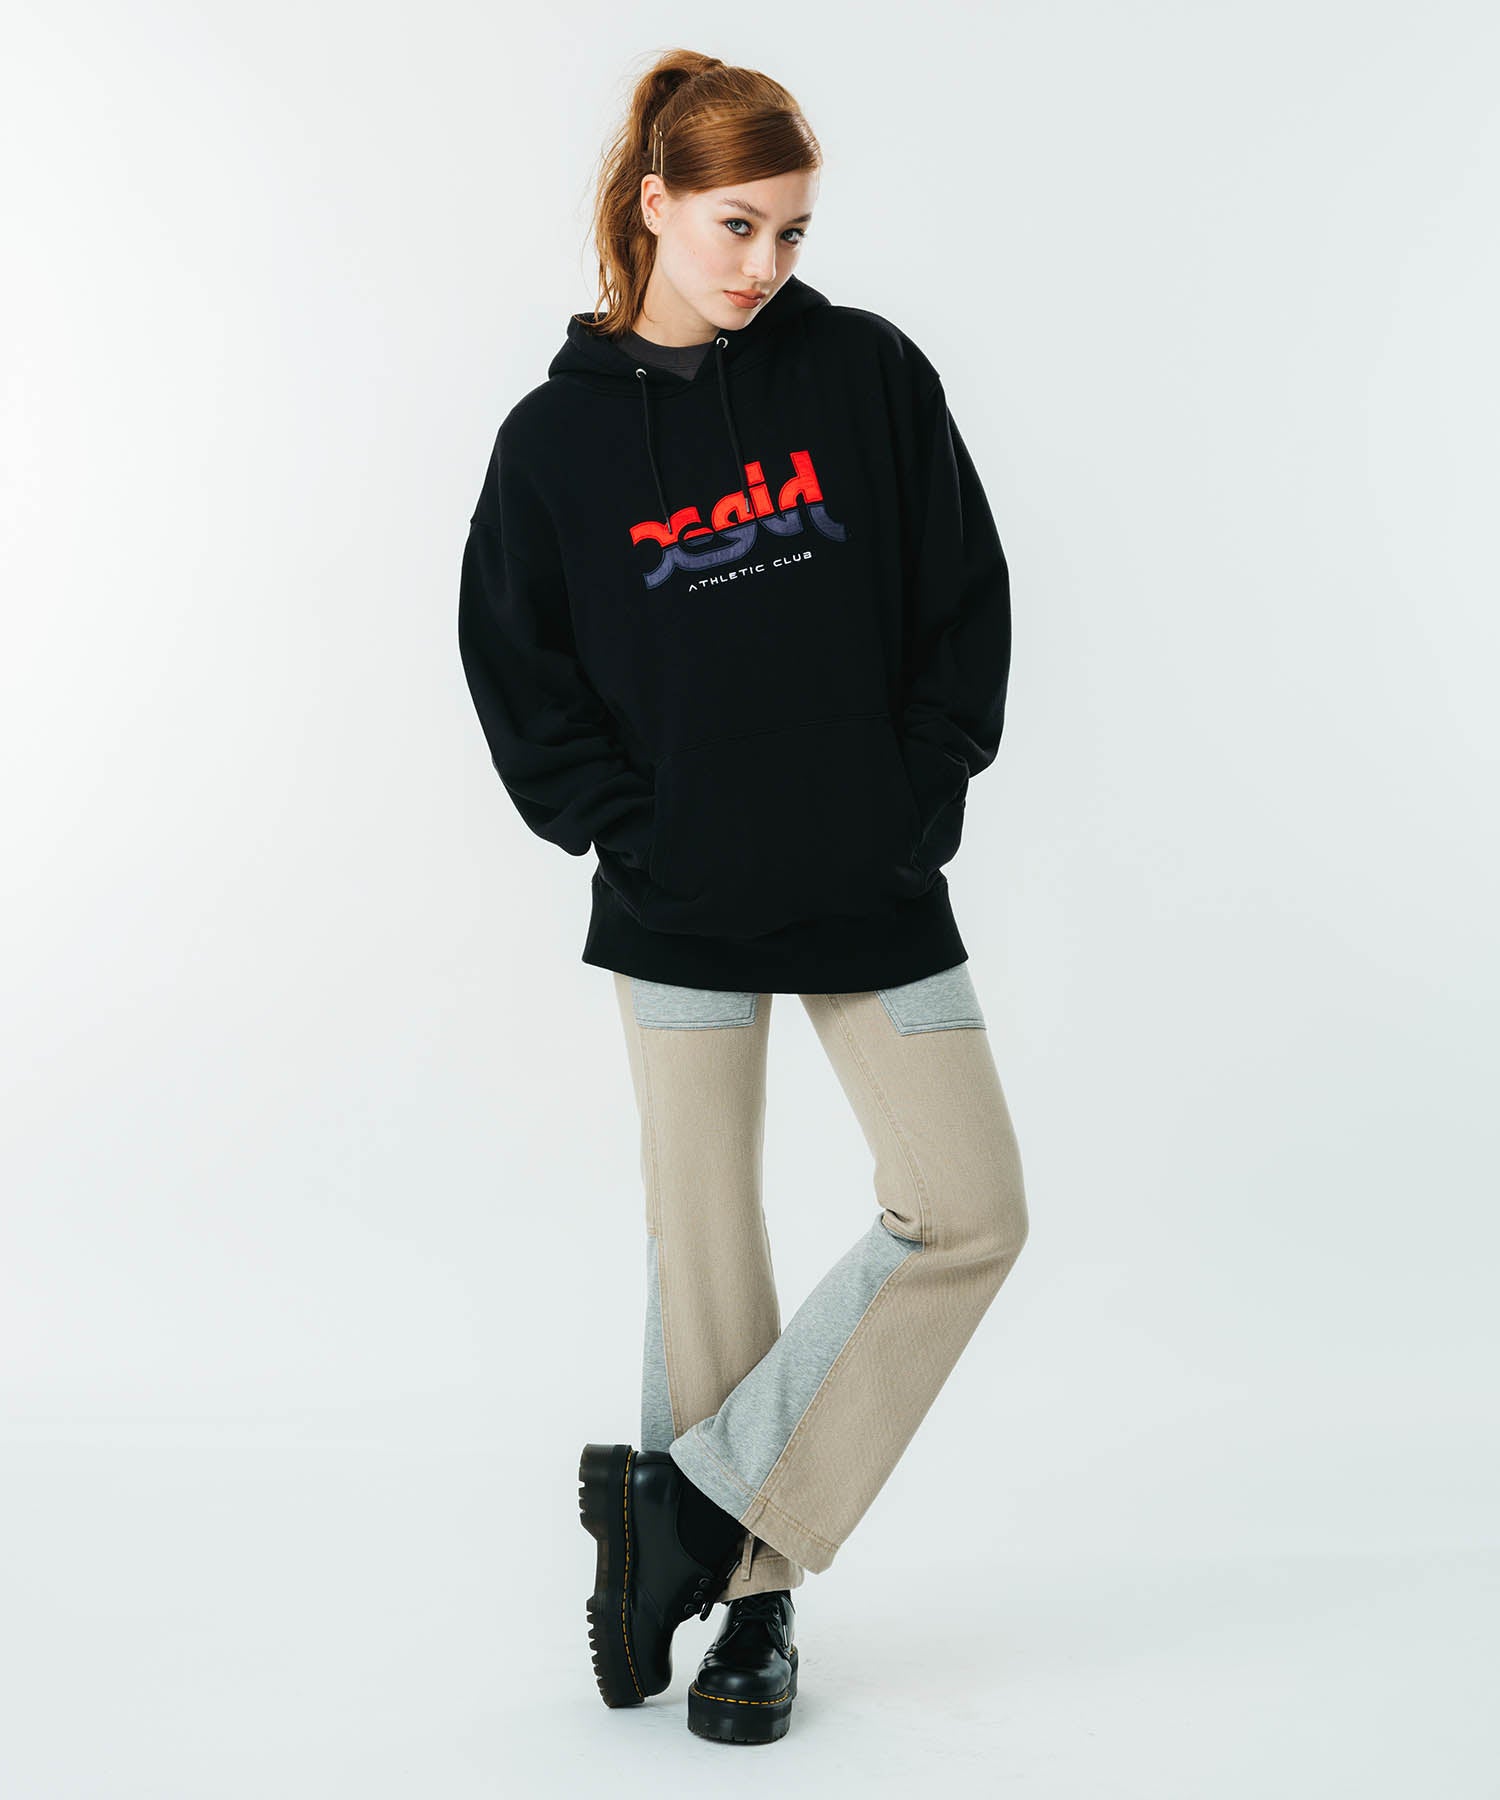 Shop the X-girl Athletic Logo Sweat Hoodie - Real Girls 